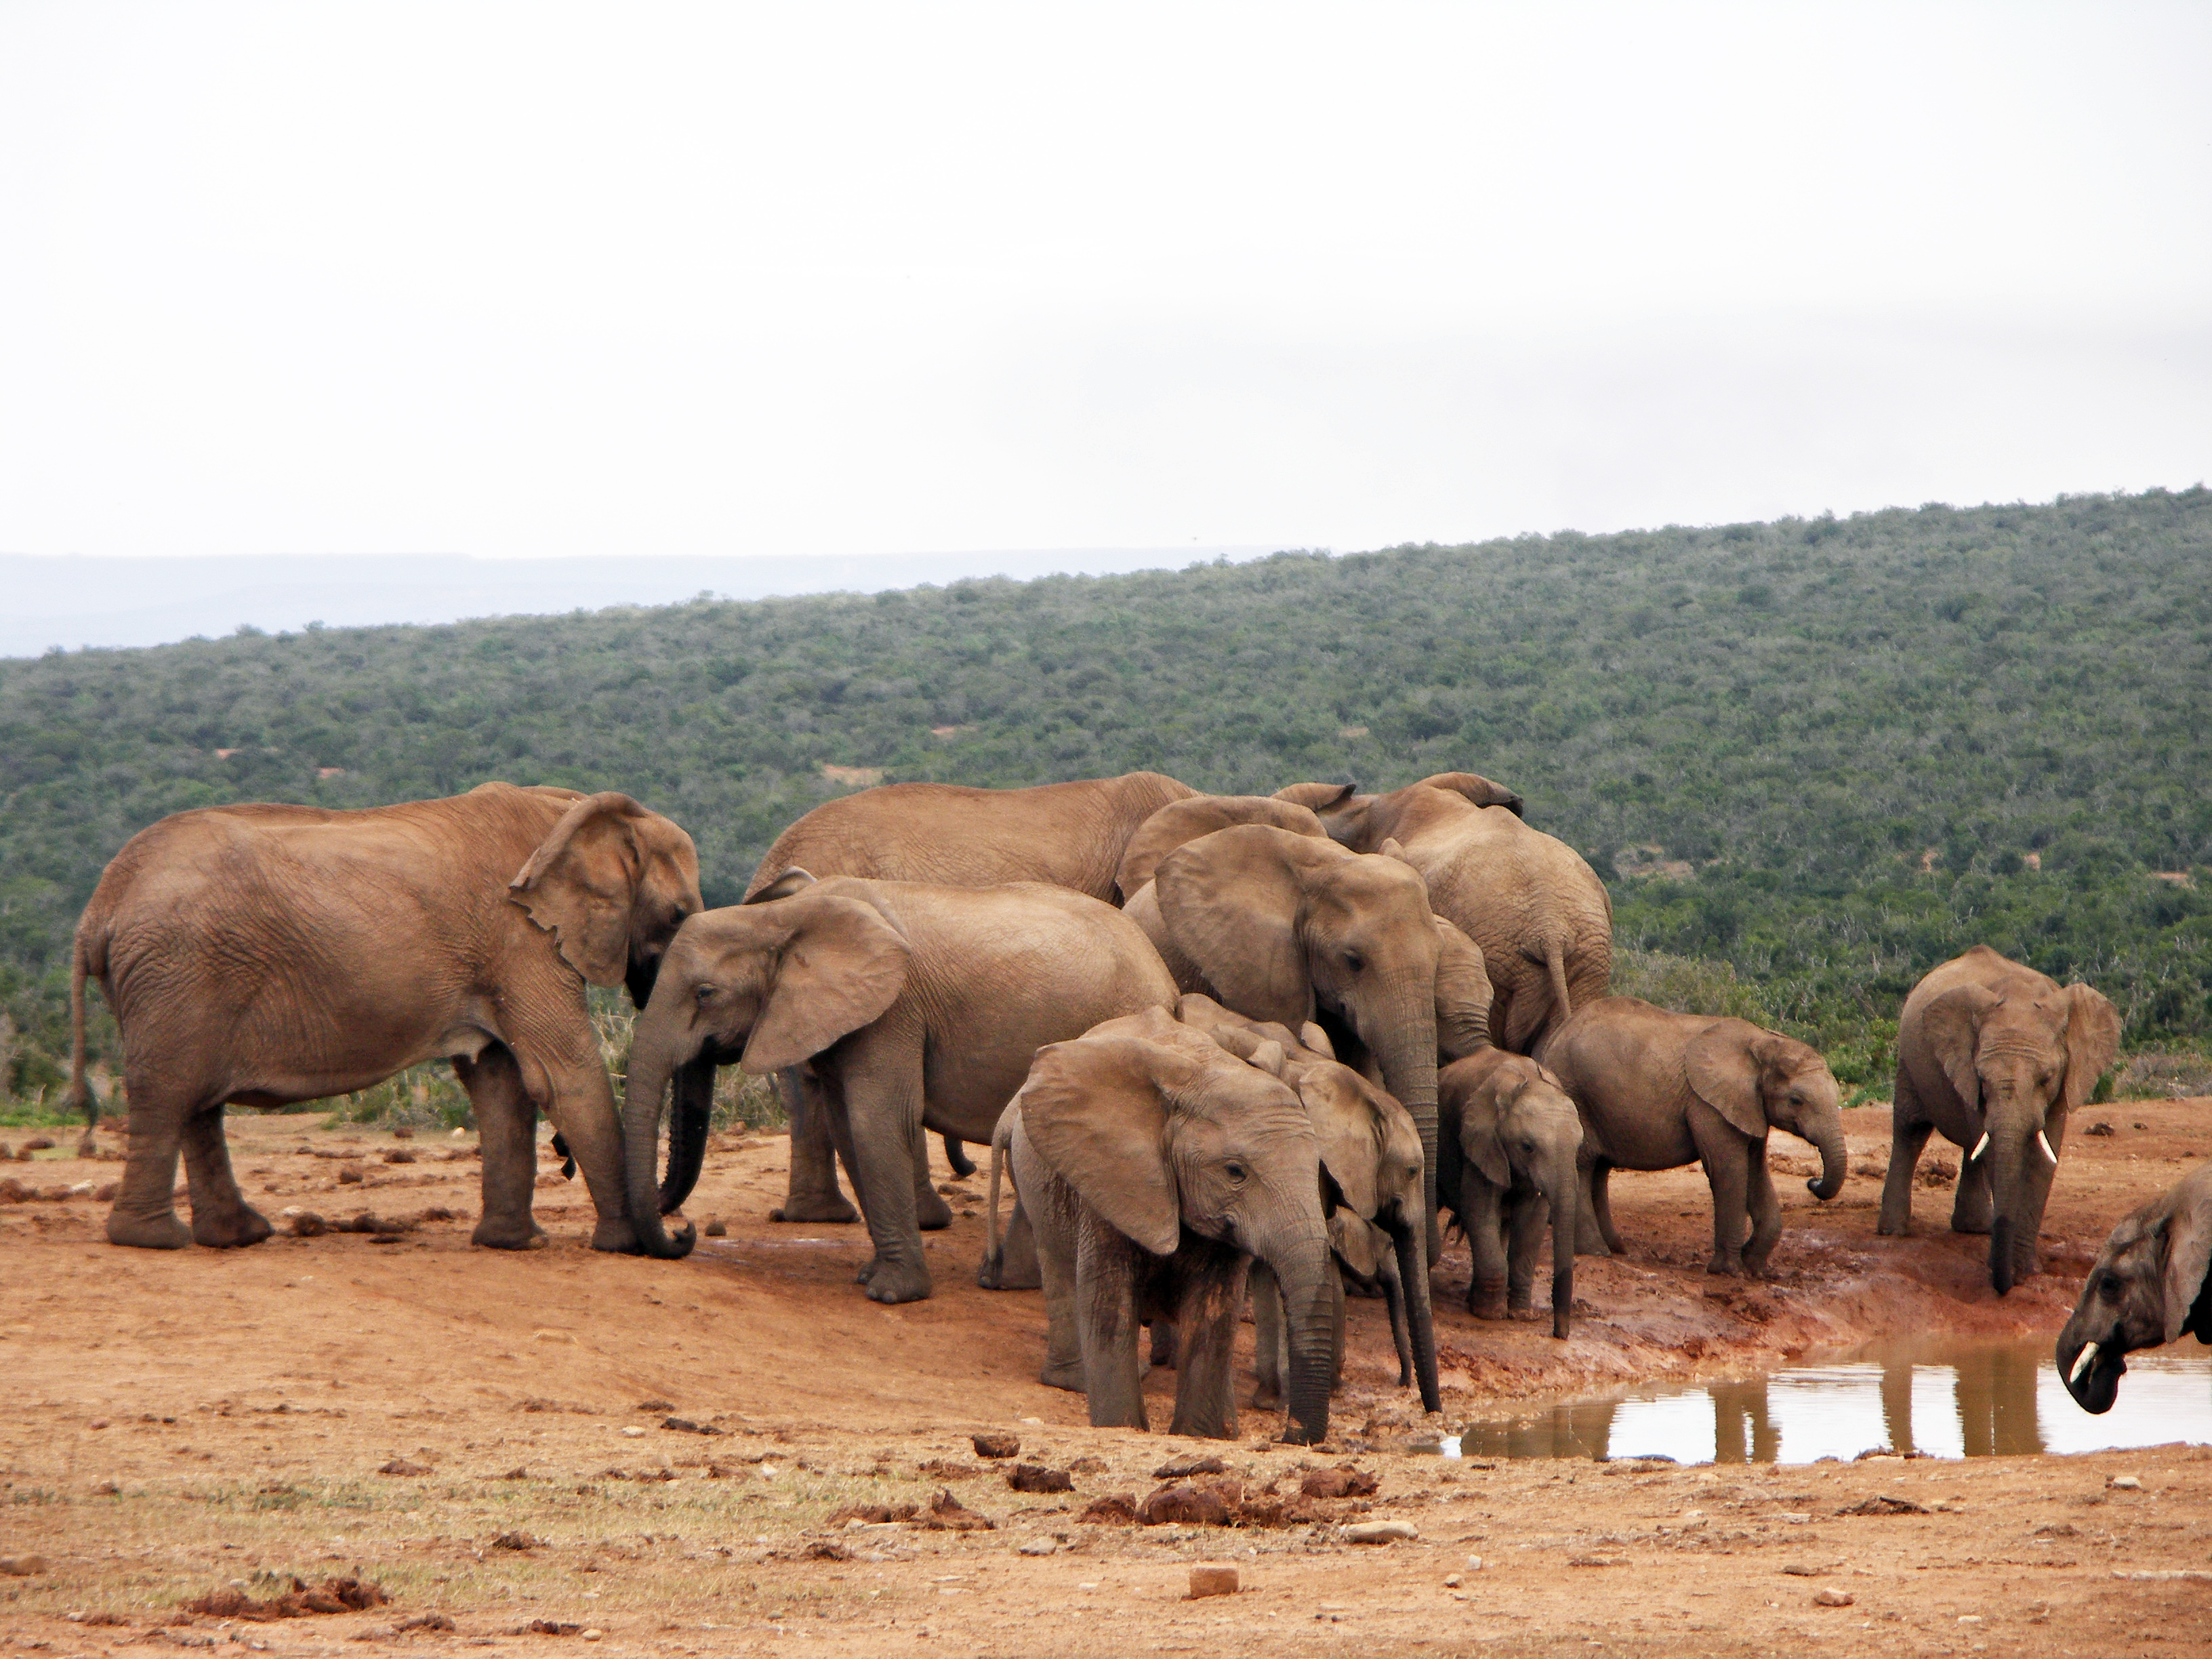 Elephants in Addo National park, many without tusks.